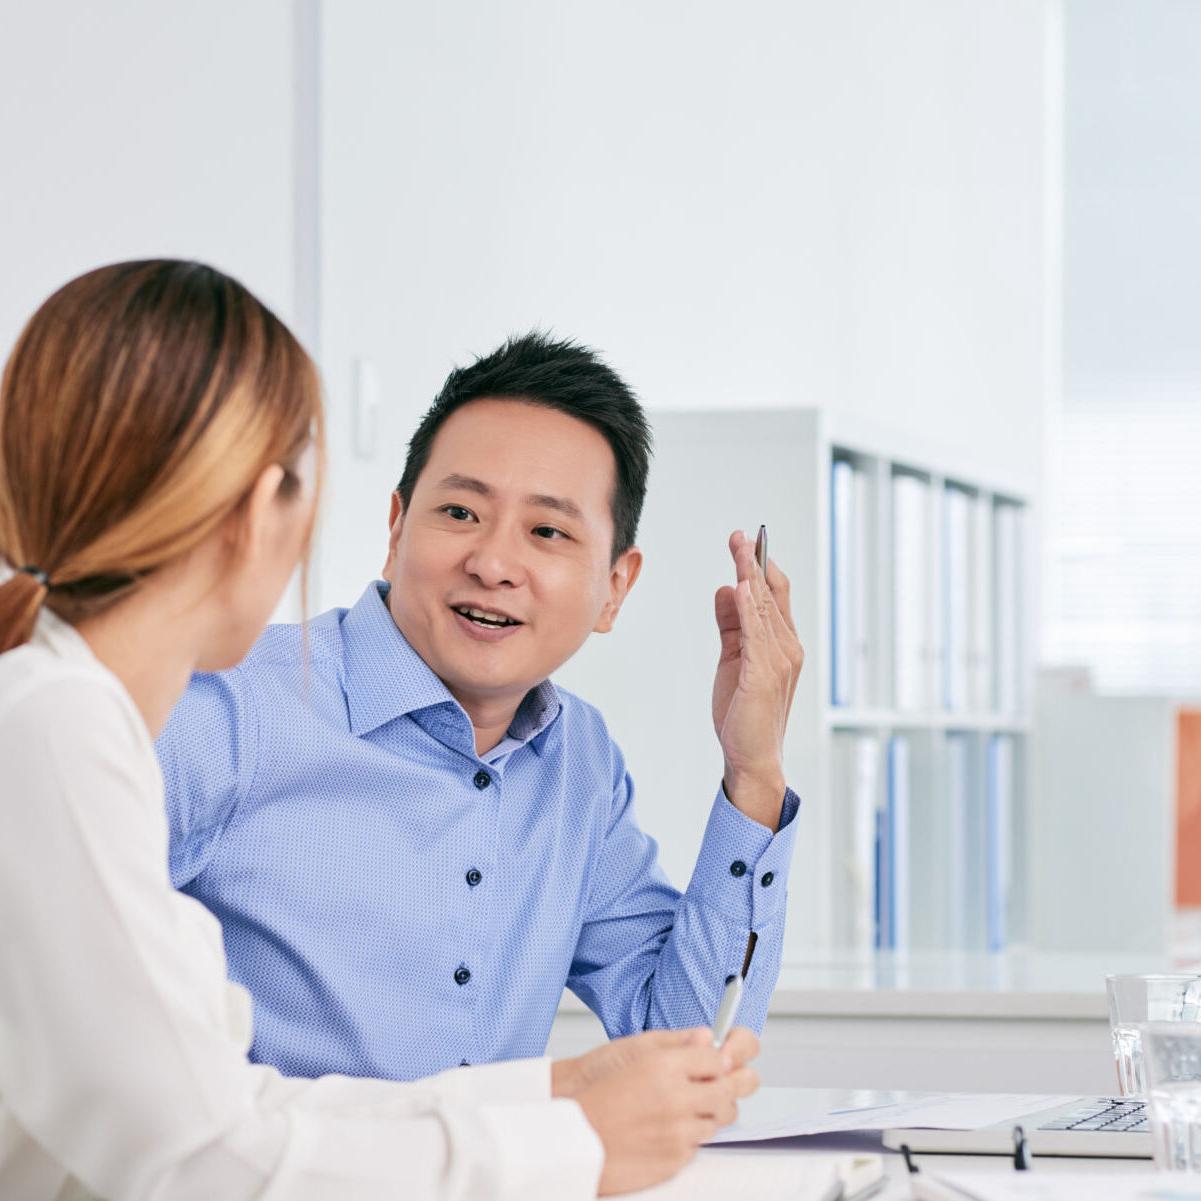 Cheerful Asian businessman talking to female coworker in office